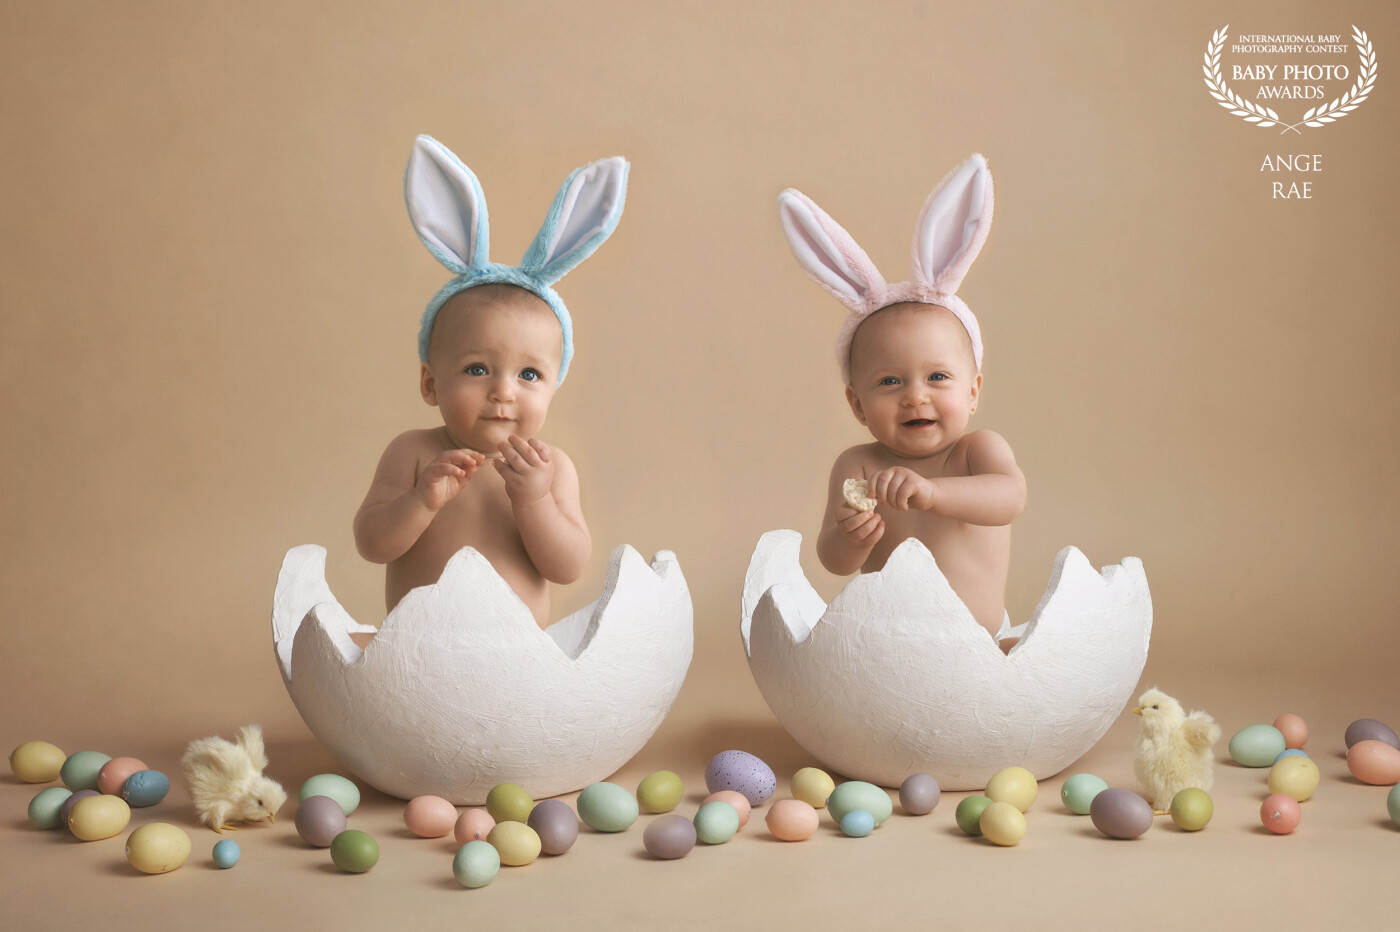 These little sweethearts came back for some updated images around Easter so I couldn't resist creating a little themed shot for them. This shot really captures their very different personalities. How adorable are they!!?